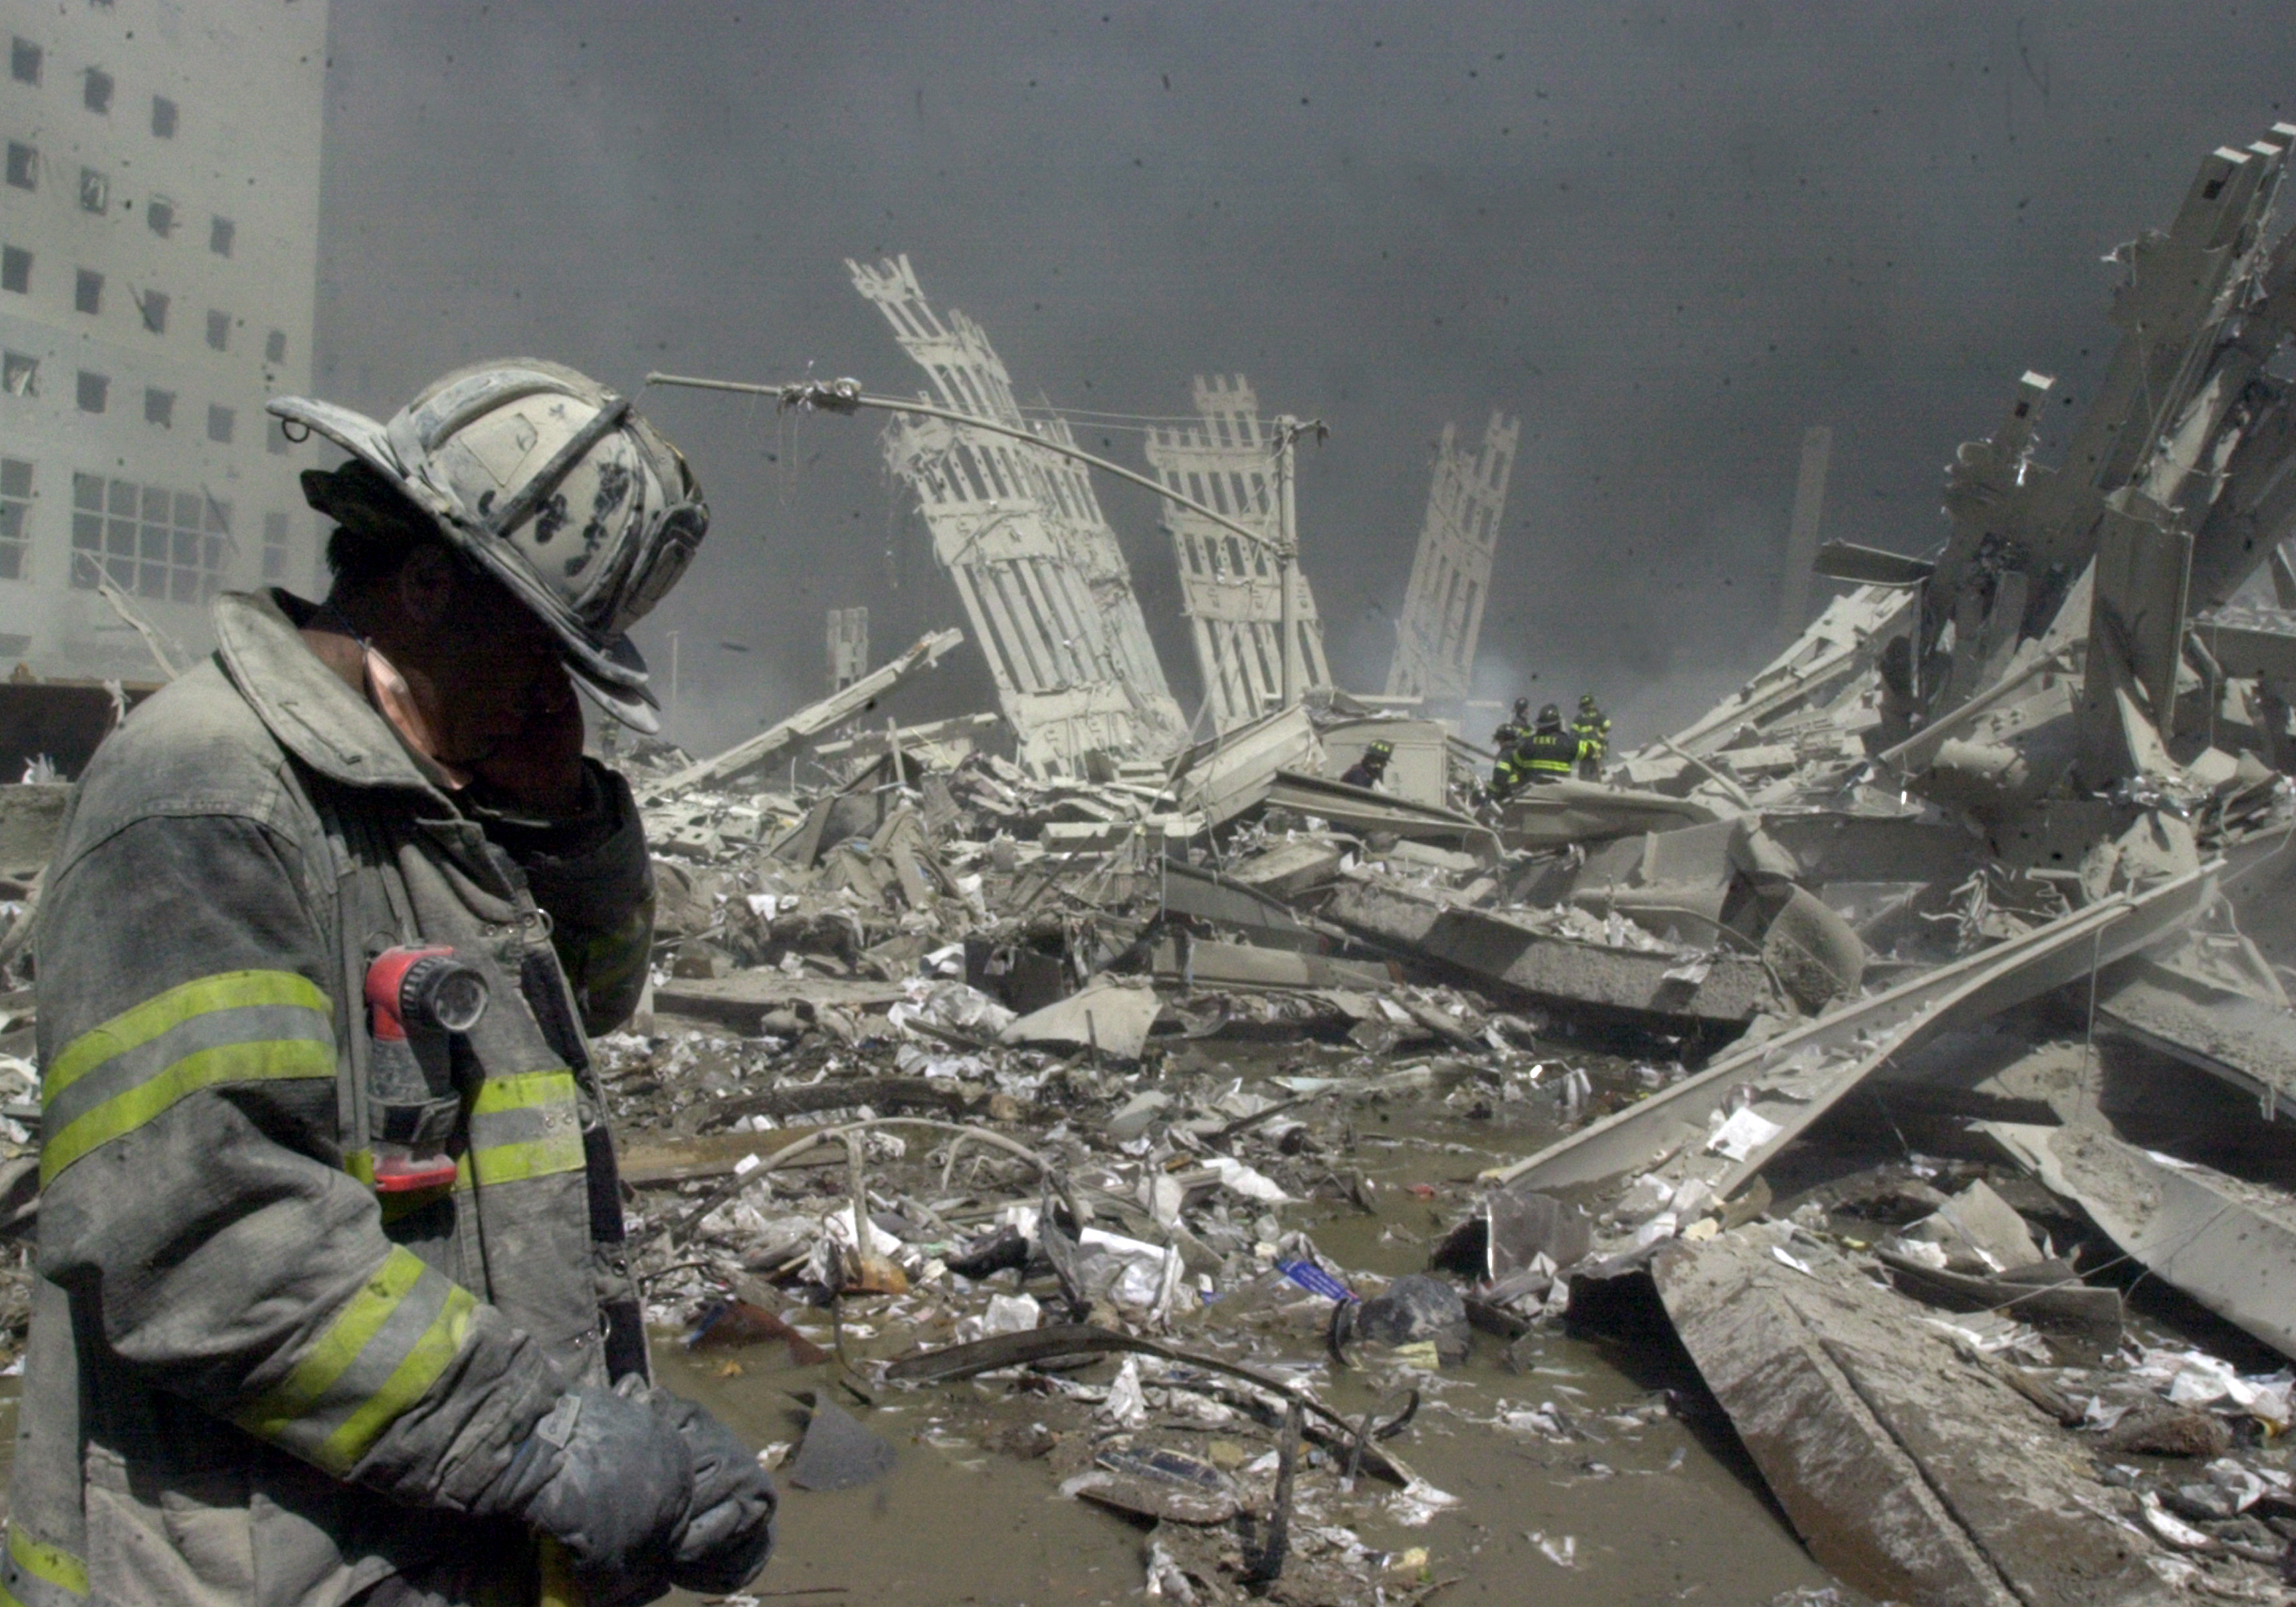 Firefighter walks through the rubble of the World Trade Center after it was struck by commercial airliners in a terrorist attack, Sept. 12 2001. after the first. (Todd Maisel—New York Daily News/Getty Images)